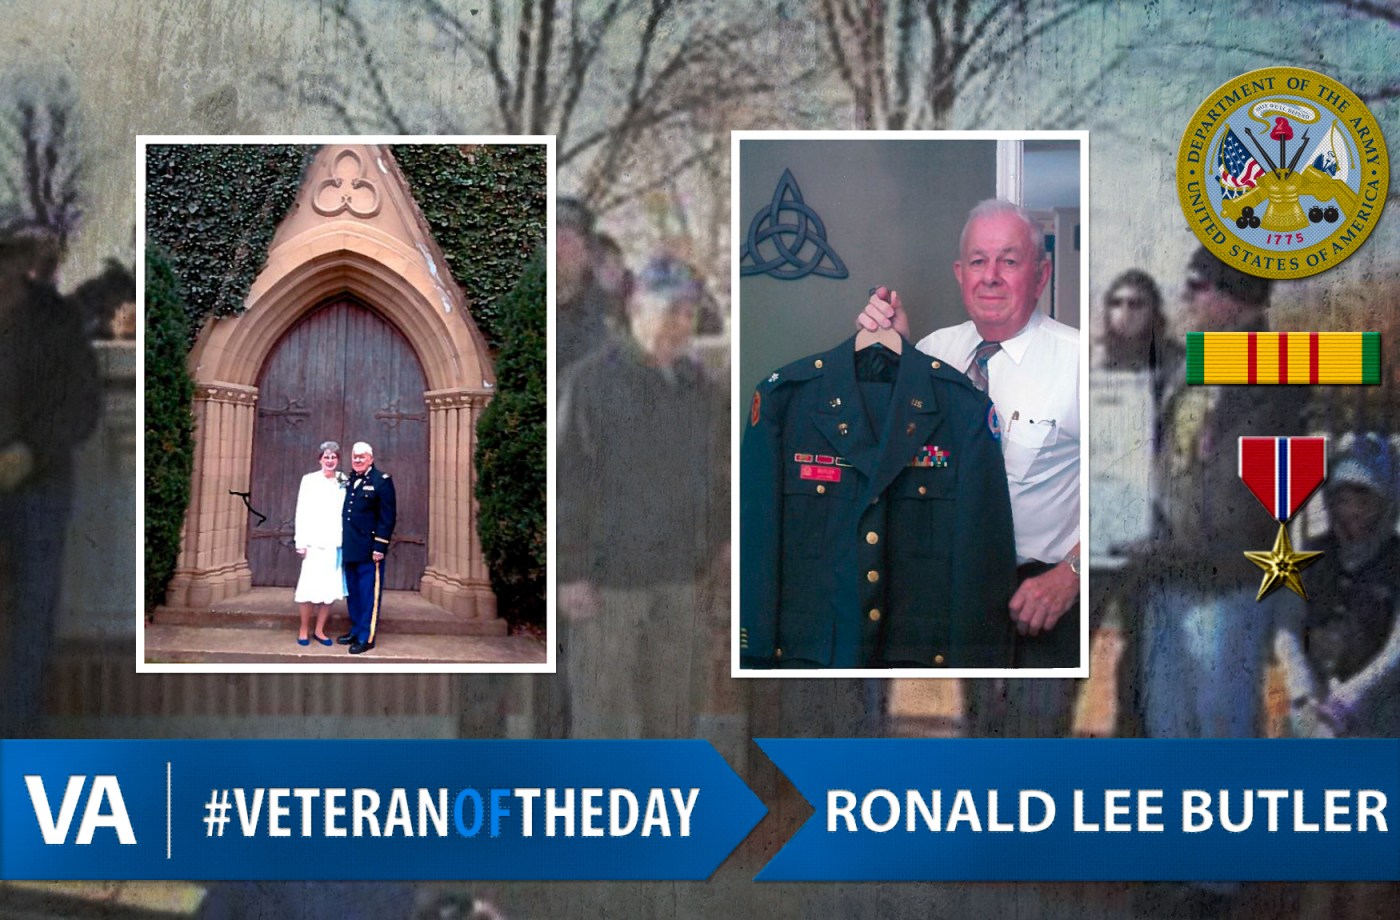 Veteran of the Day Ronald Lee Butler